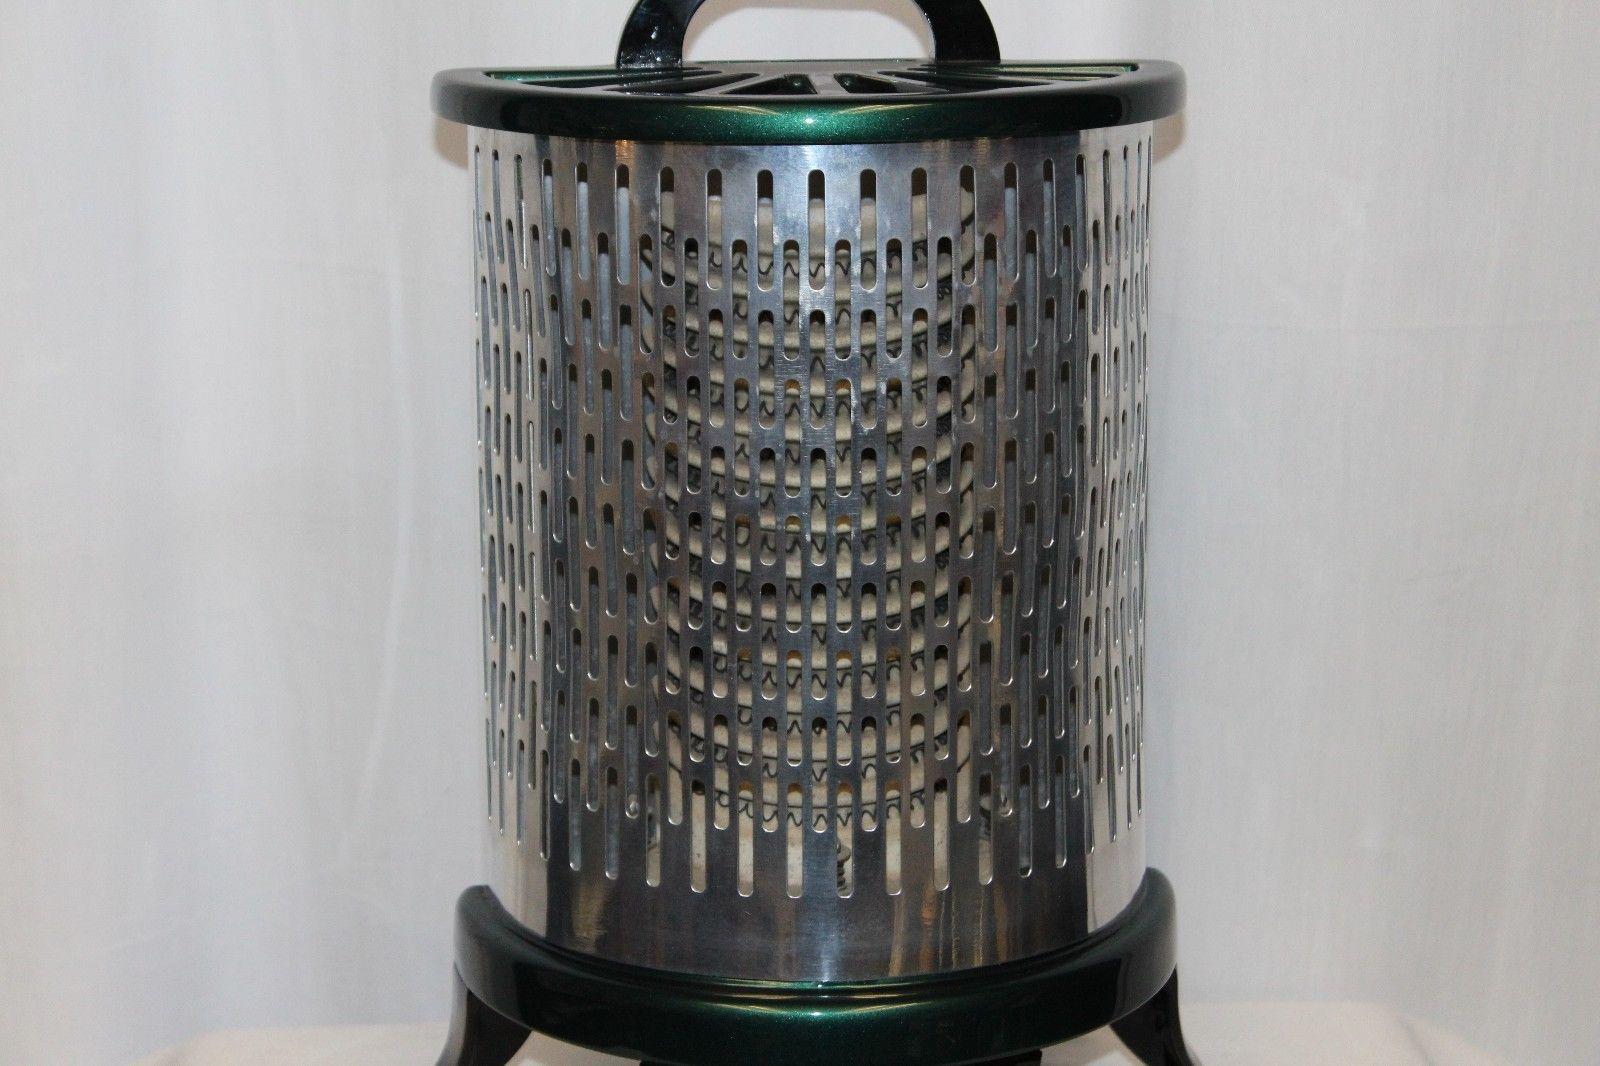 Awesome Art Deco heater. Seems to be mostly original just cleaned up.